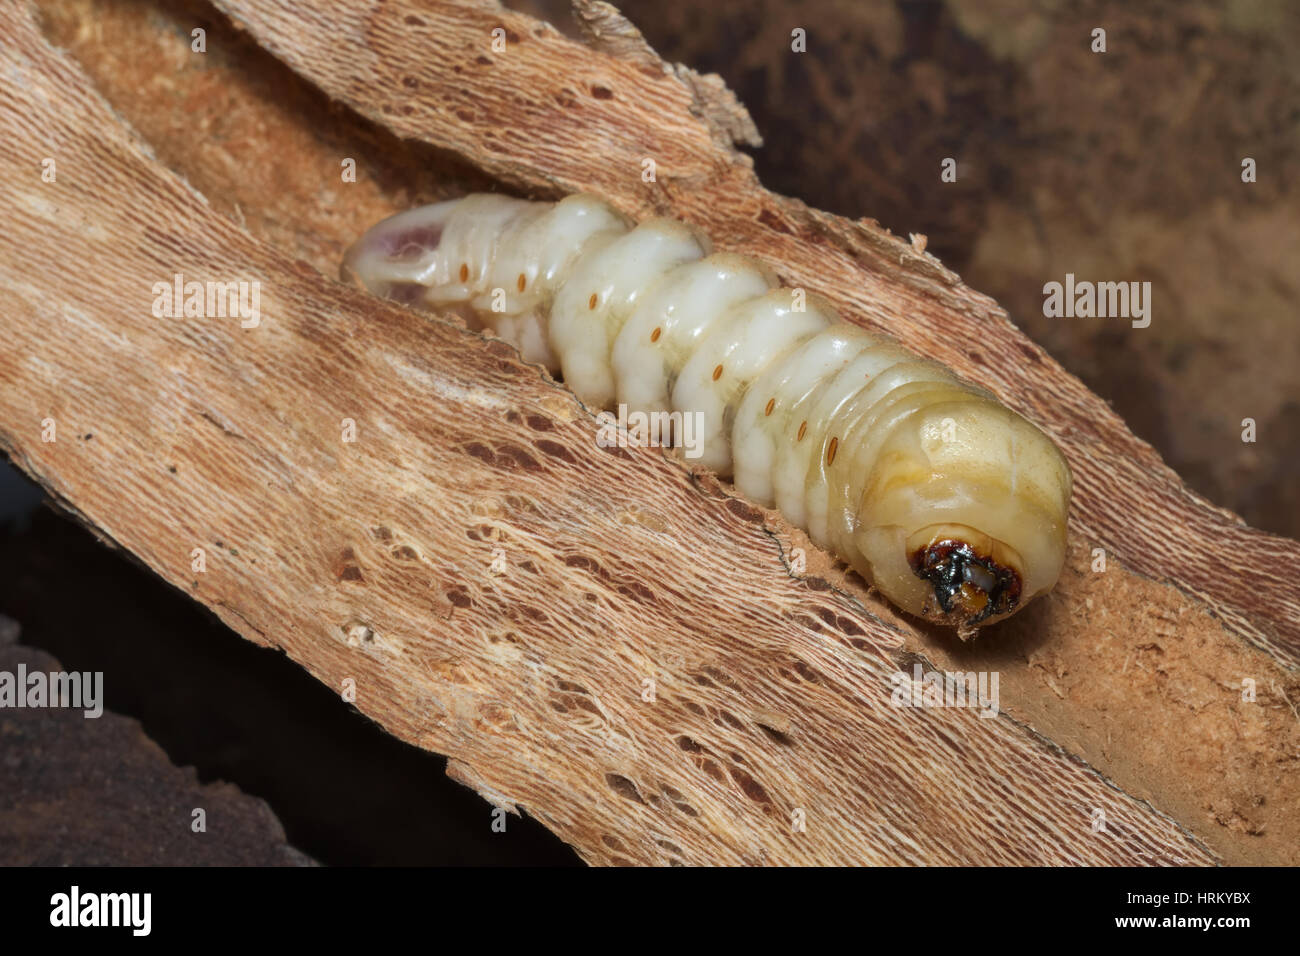 Advanced larval stage of a stag beetle (Lucanus cervus) growing inside dead wood of an old tree Stock Photo